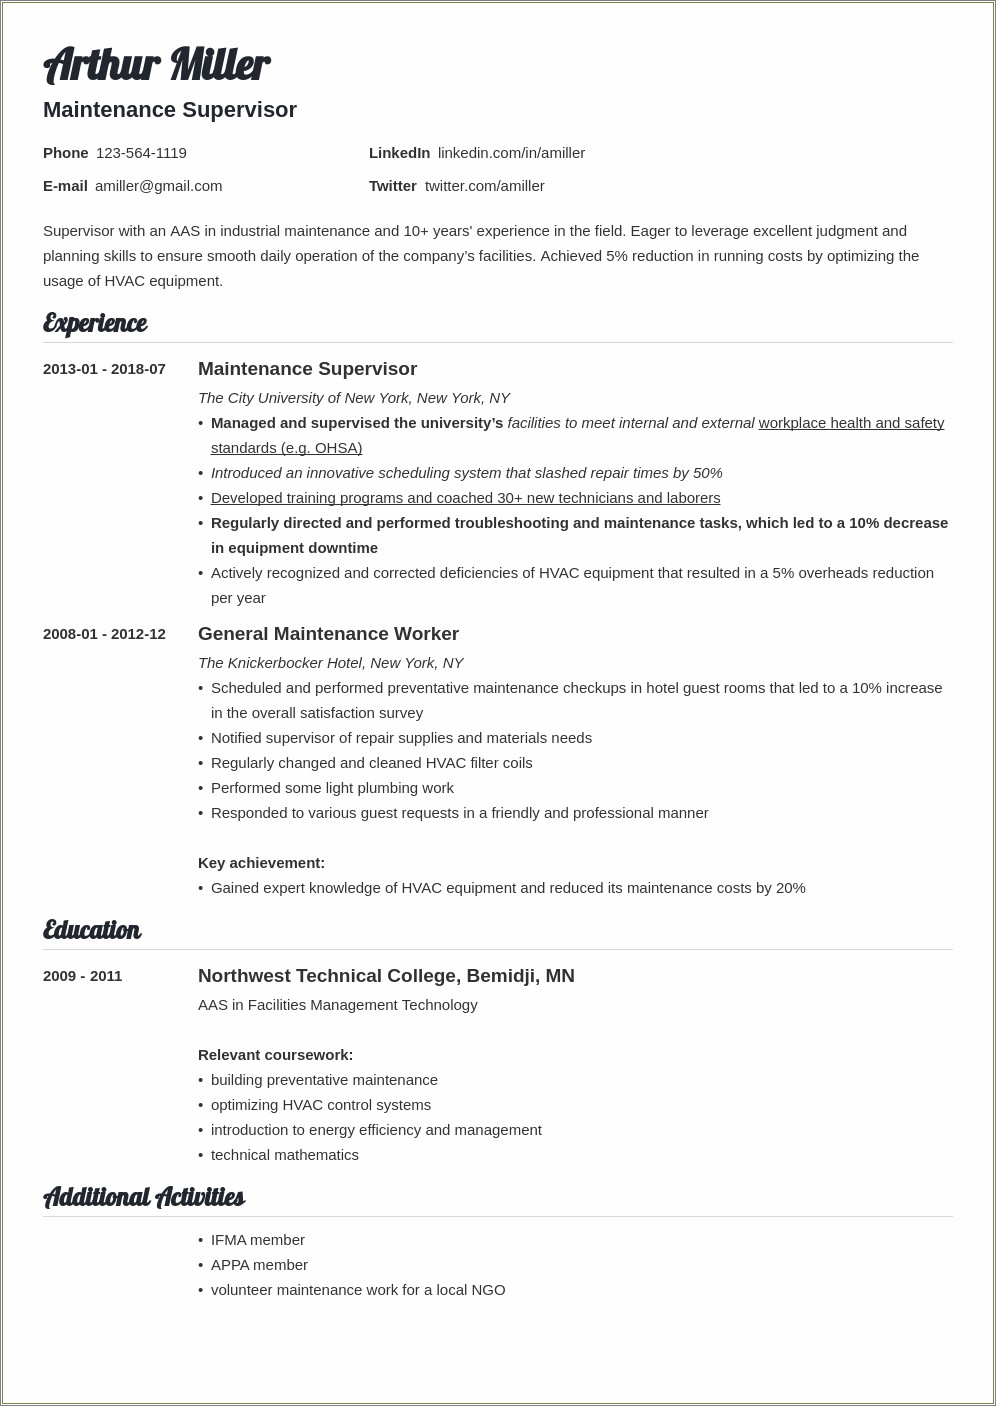 Emerging Museum Professional And Resume Sample